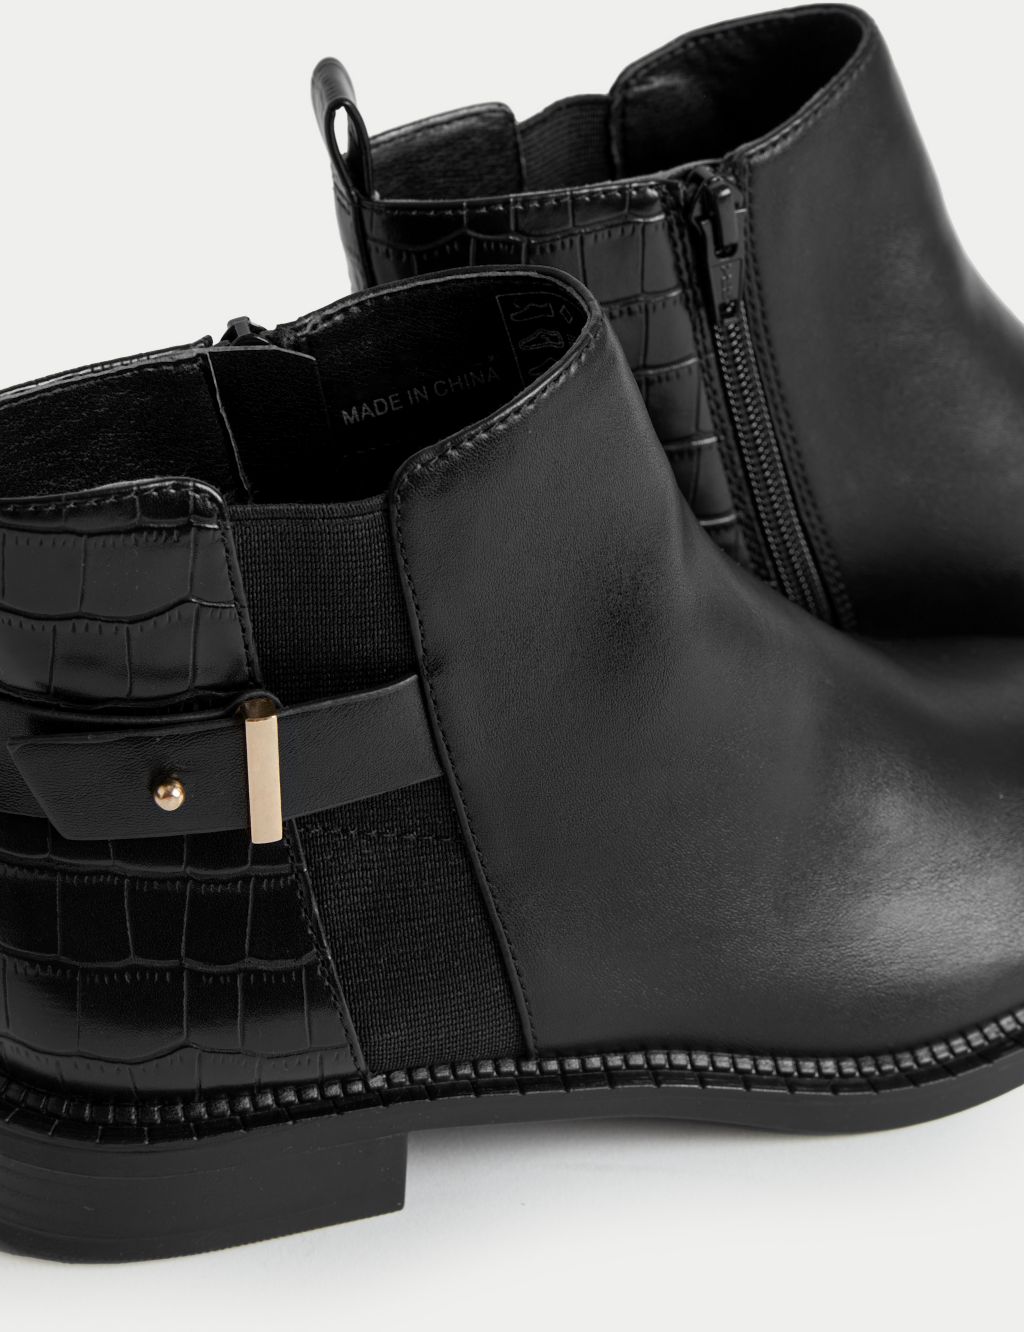 Croc Buckle Ankle Boots image 3